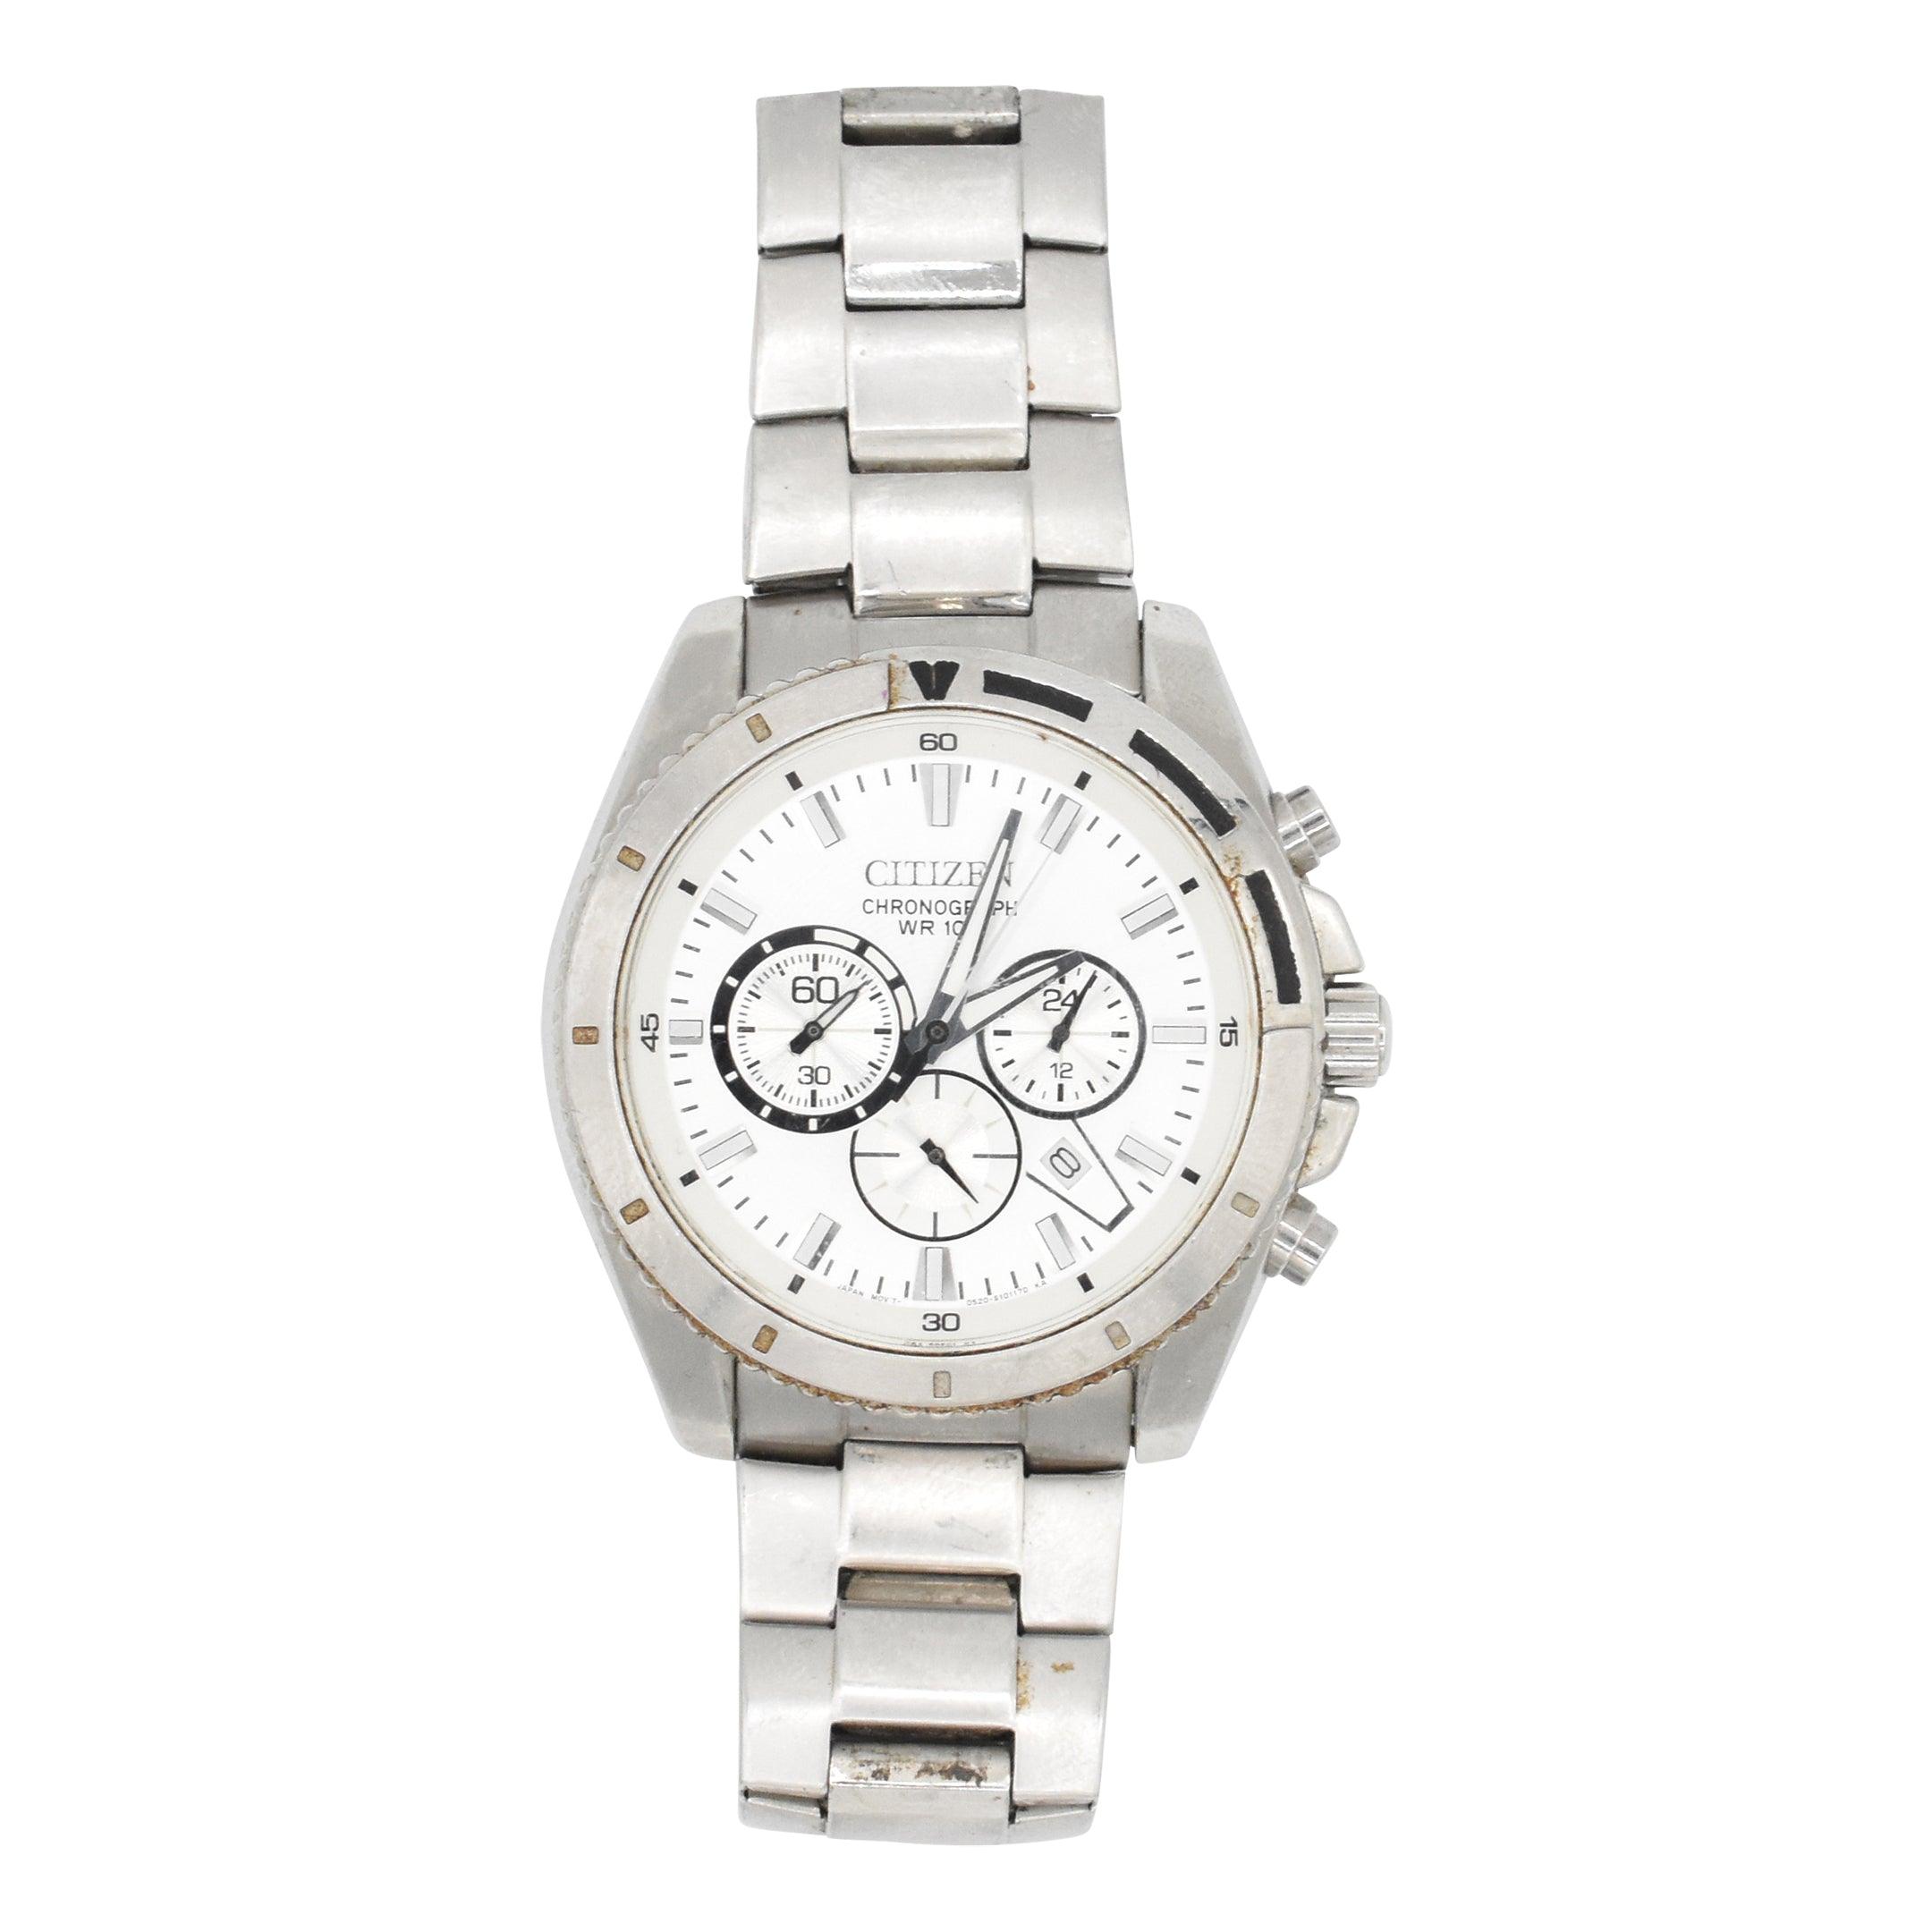 Citizen 'Chronograph WR 100' Watch - Fashionably Yours